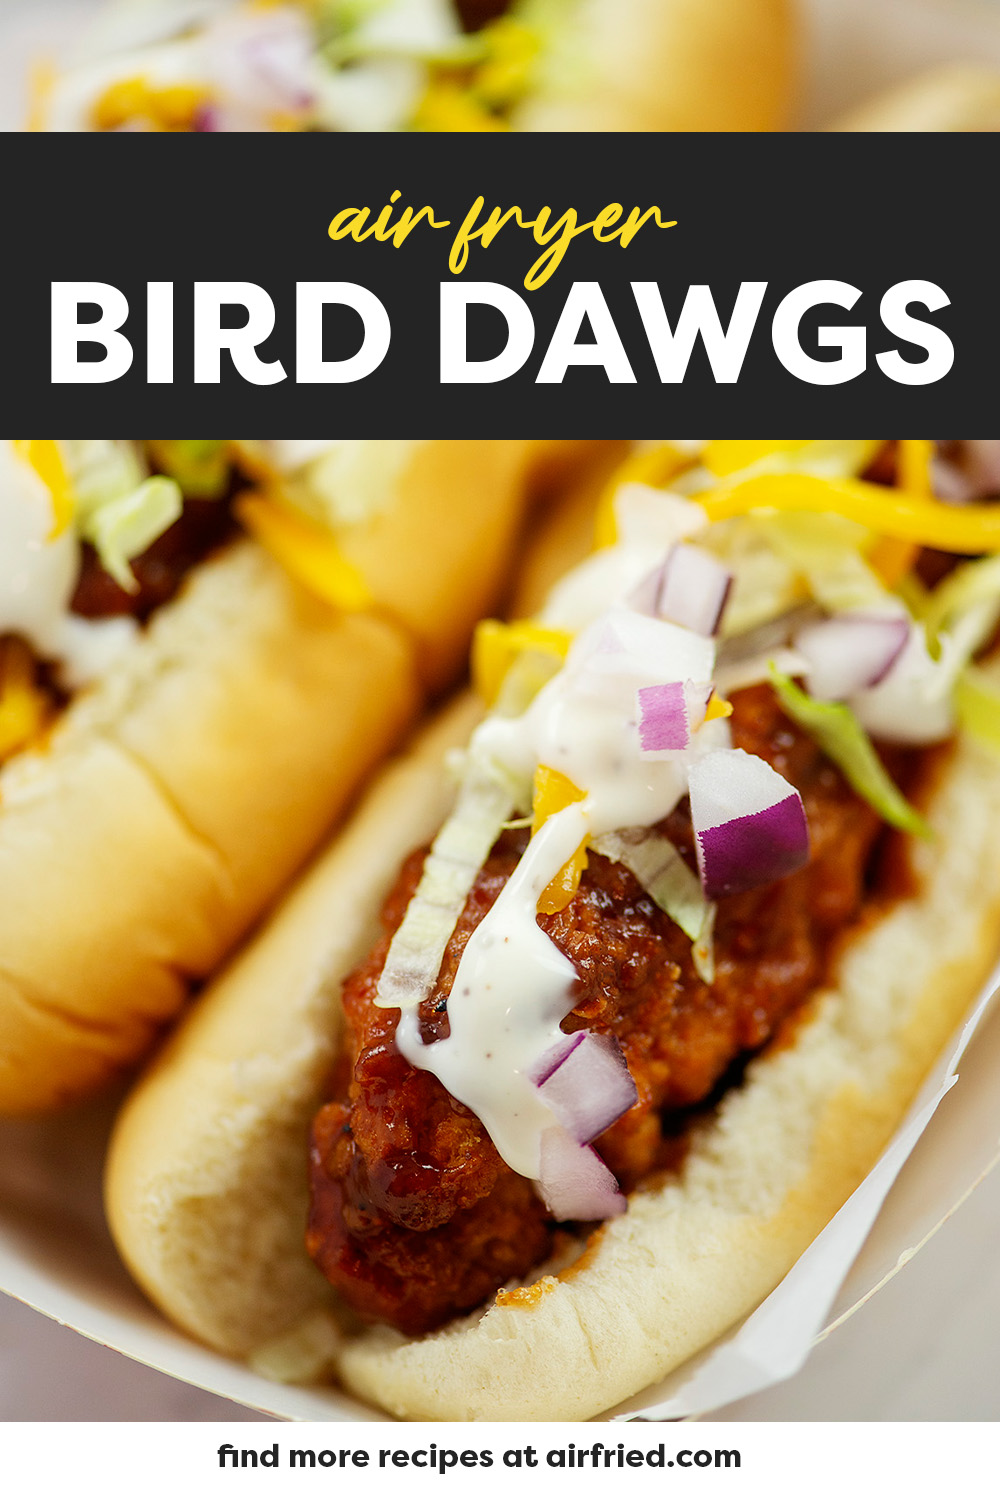 These honey BBQ bird dawgs are an air fryer version of the Buffalo Wild Wings favorite!  